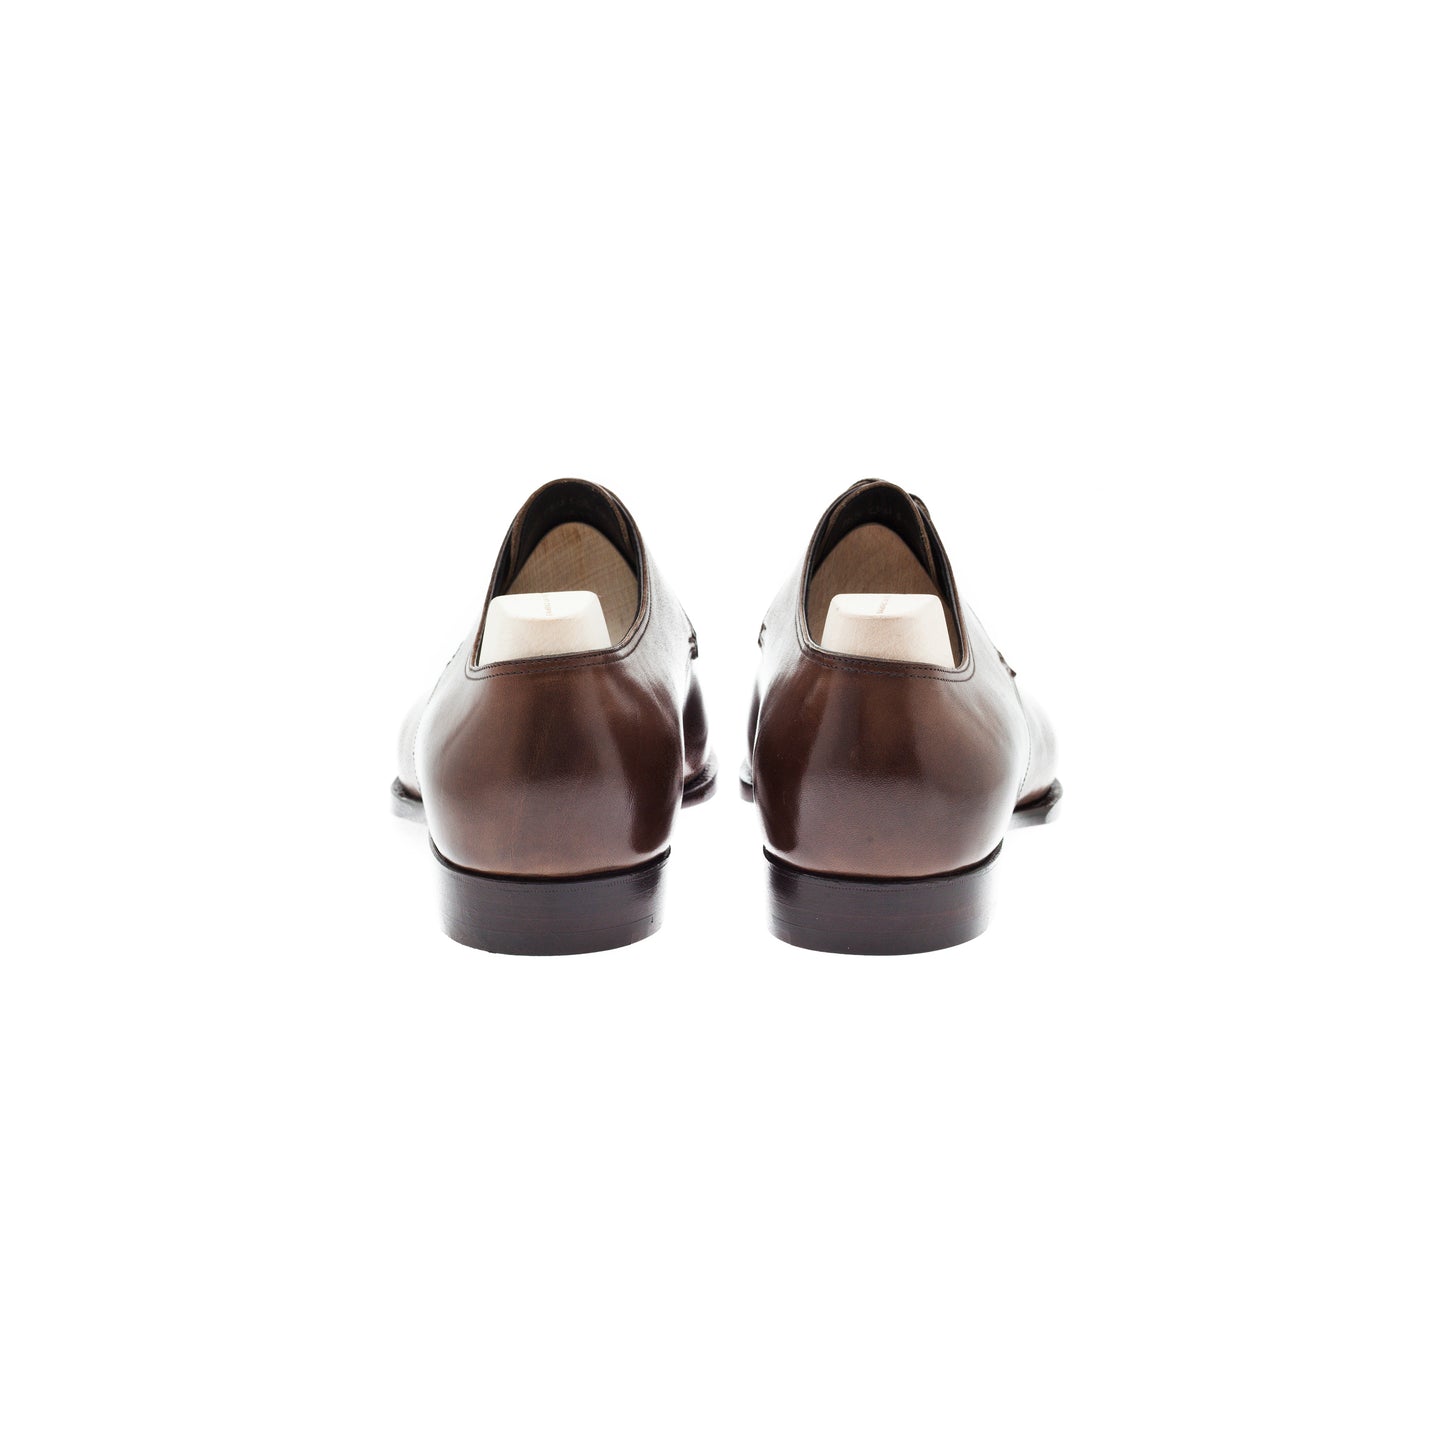 Two eyelet French Norwegian Derby in Milkchocolate calf leather